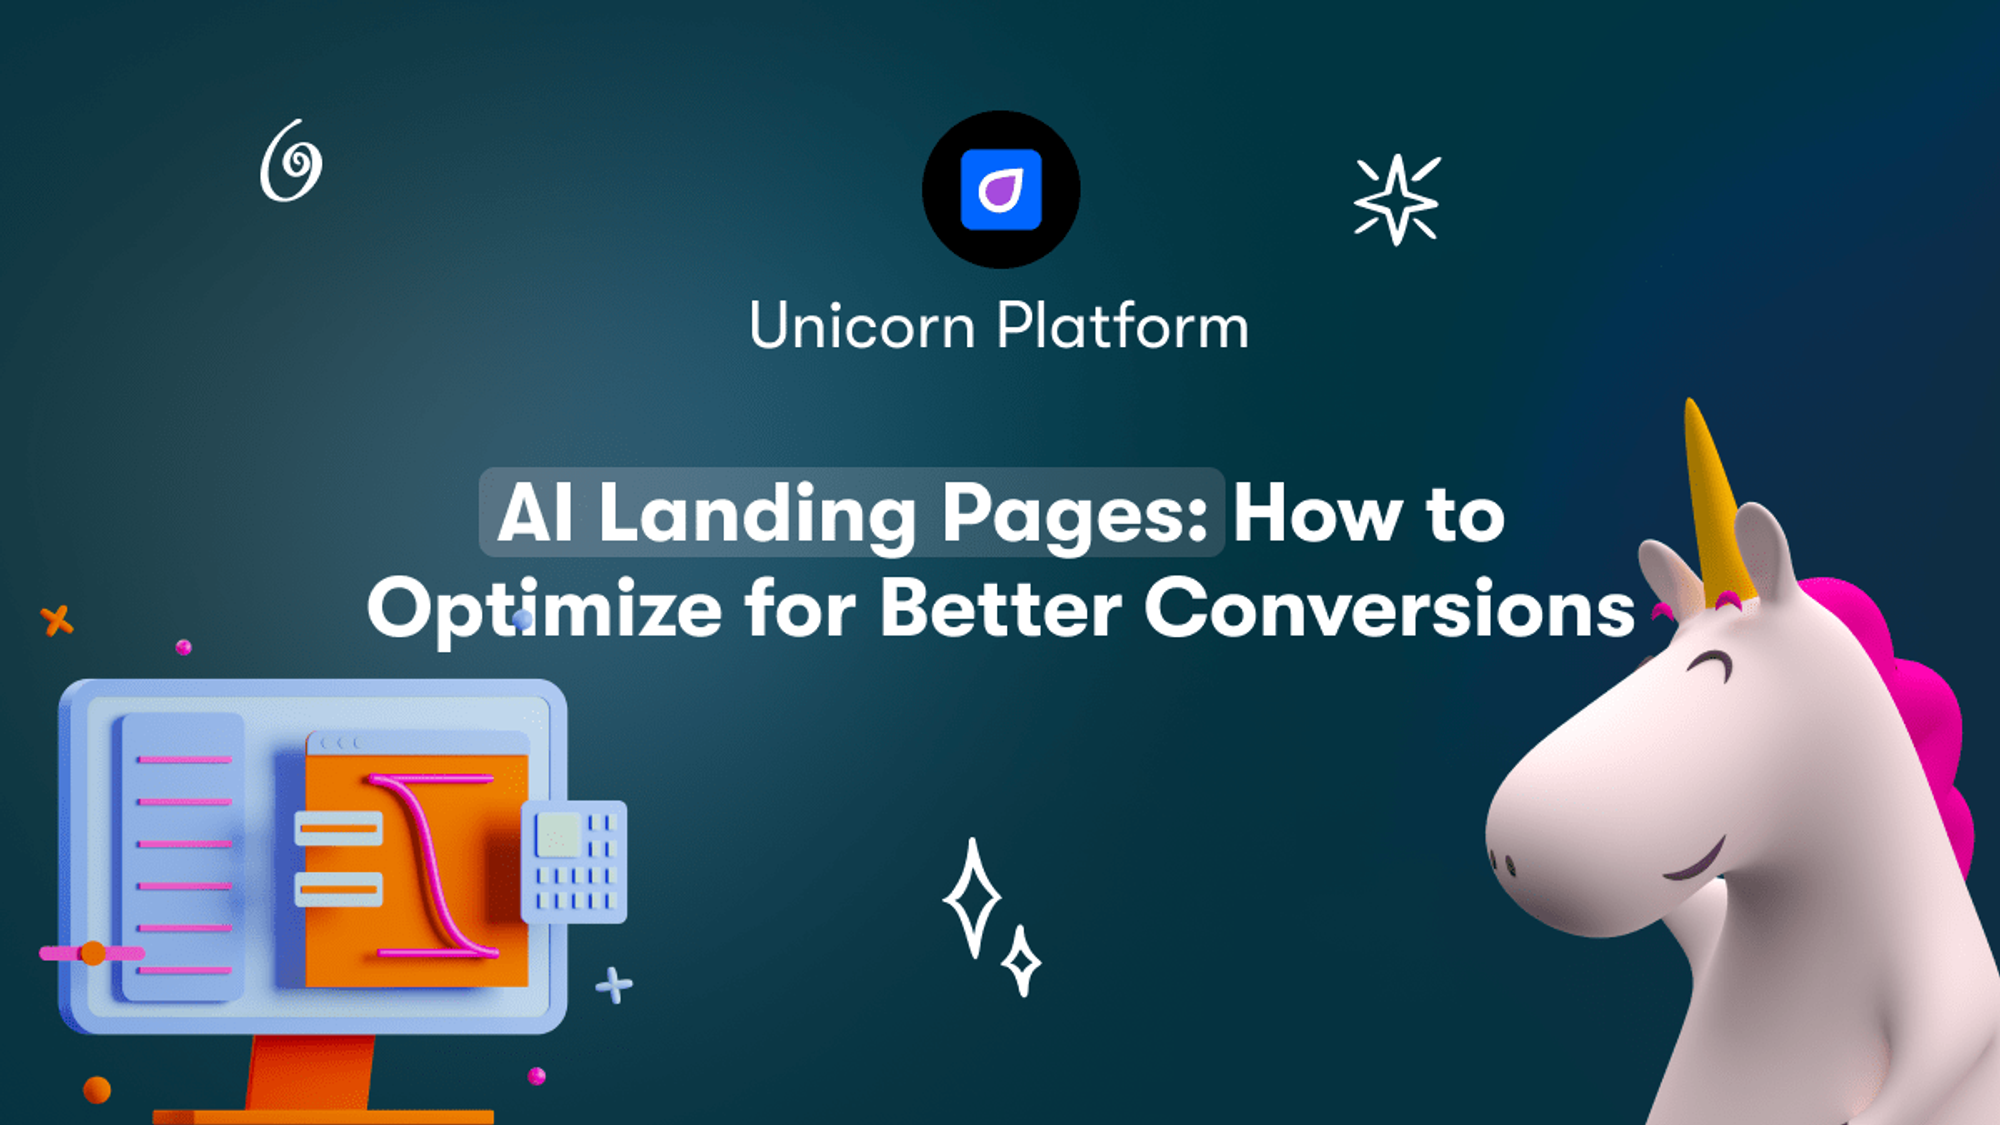 AI Landing Pages: How to Optimize for Better Conversions